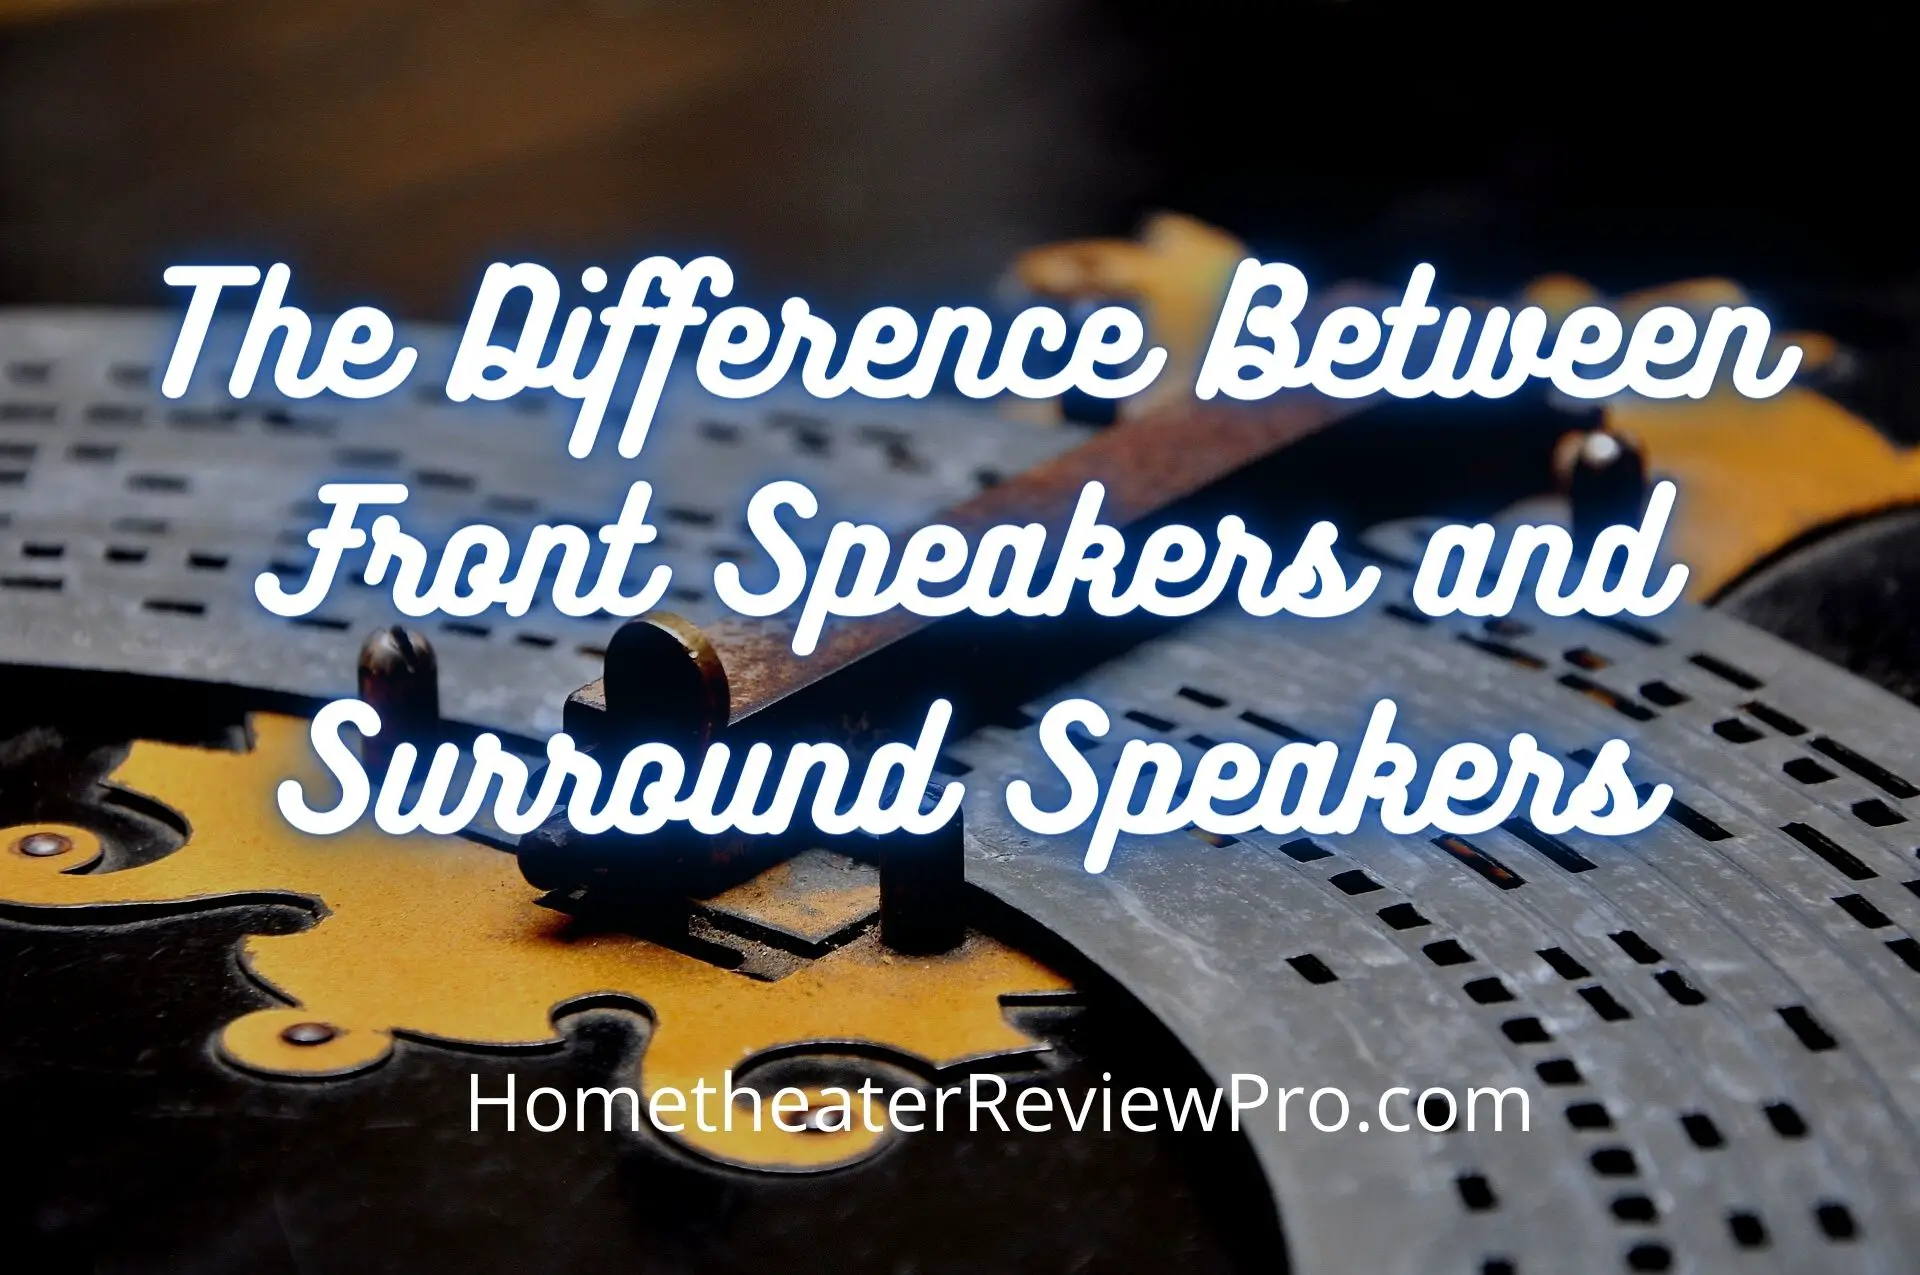 The Difference Between Front Speakers and Surround Speakers